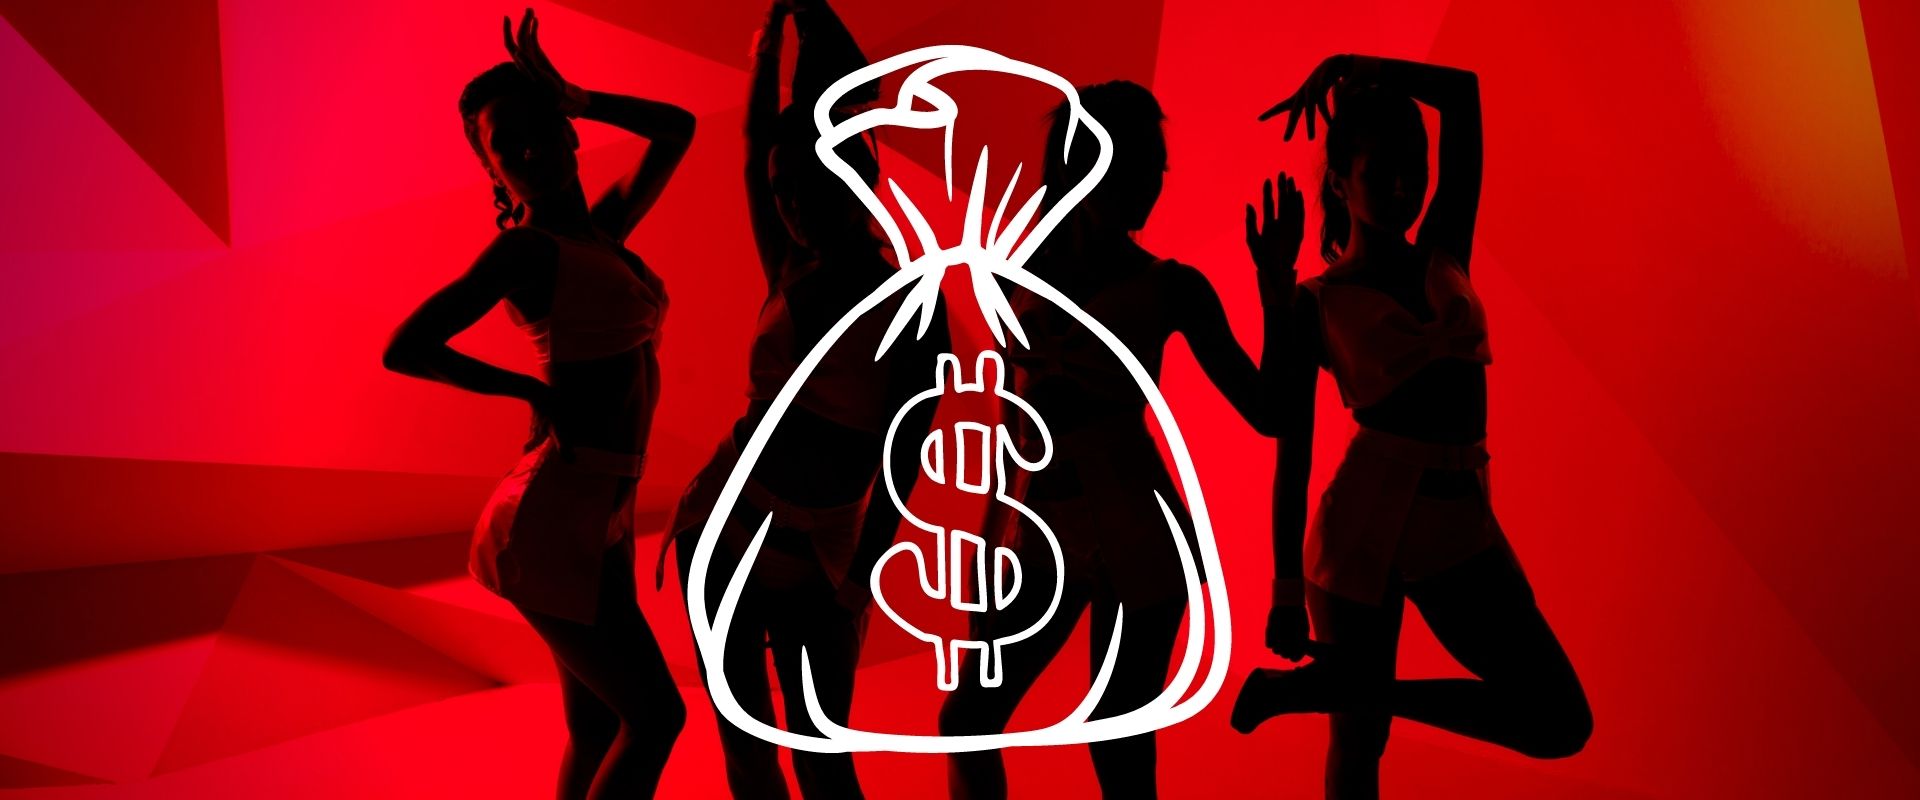 100 Ways To Make Money Sexually Online (Without Showing Your Face) picture picture photo